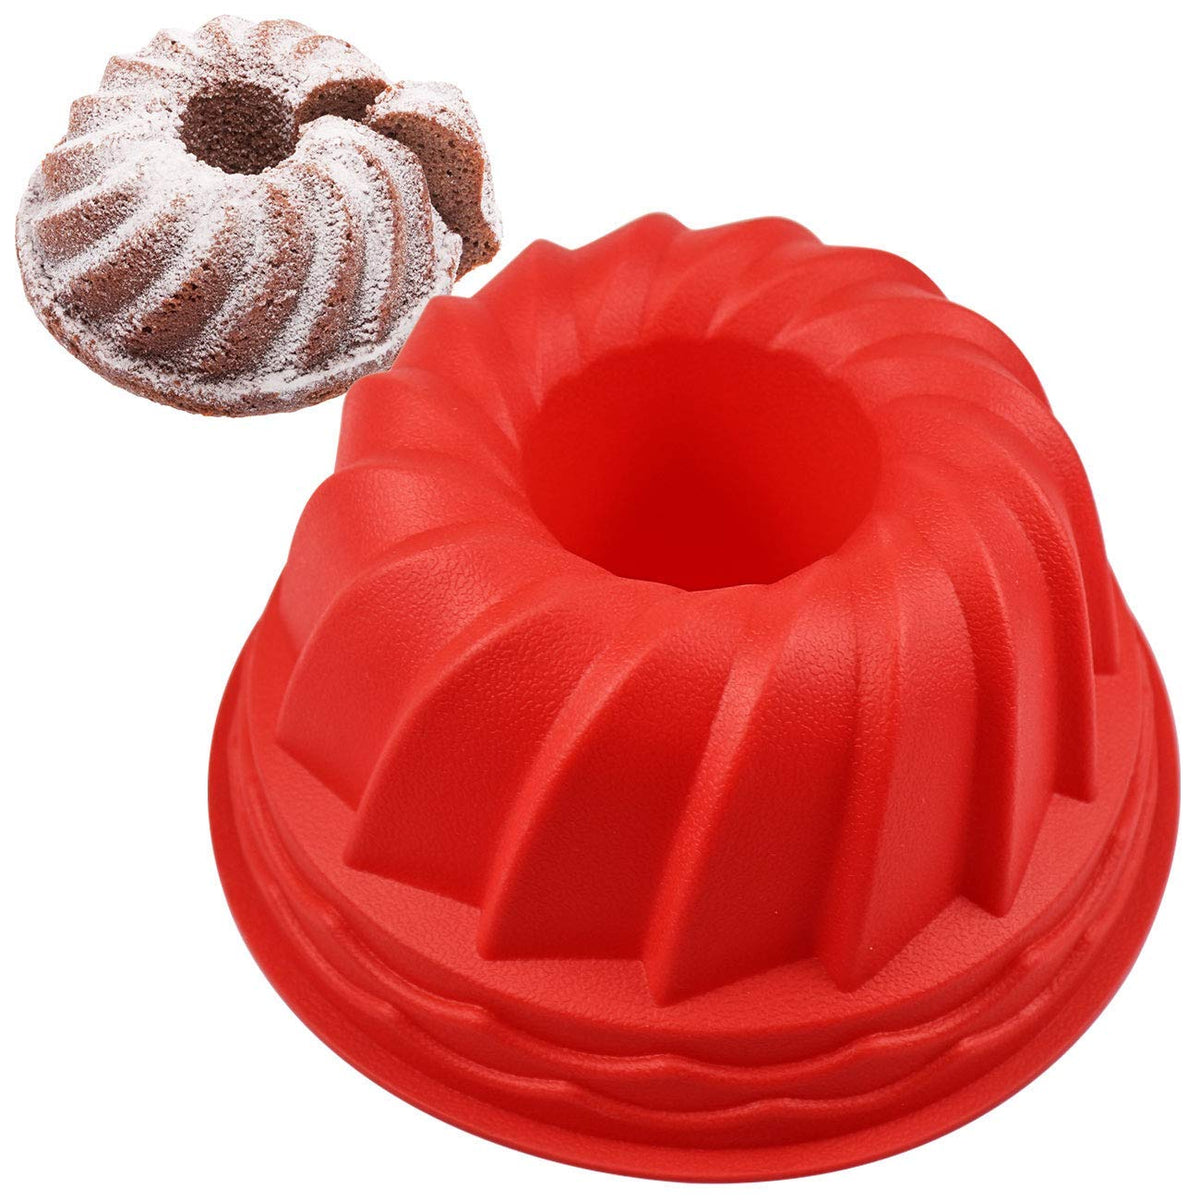 BAKER DEPOT 2 Pack Swirl Silicone Fluted Cake Pans for Baking 8 Inch Round  Tube Mould Non-Stick Mousse Chocolate Cakes Pan for Jello Bread